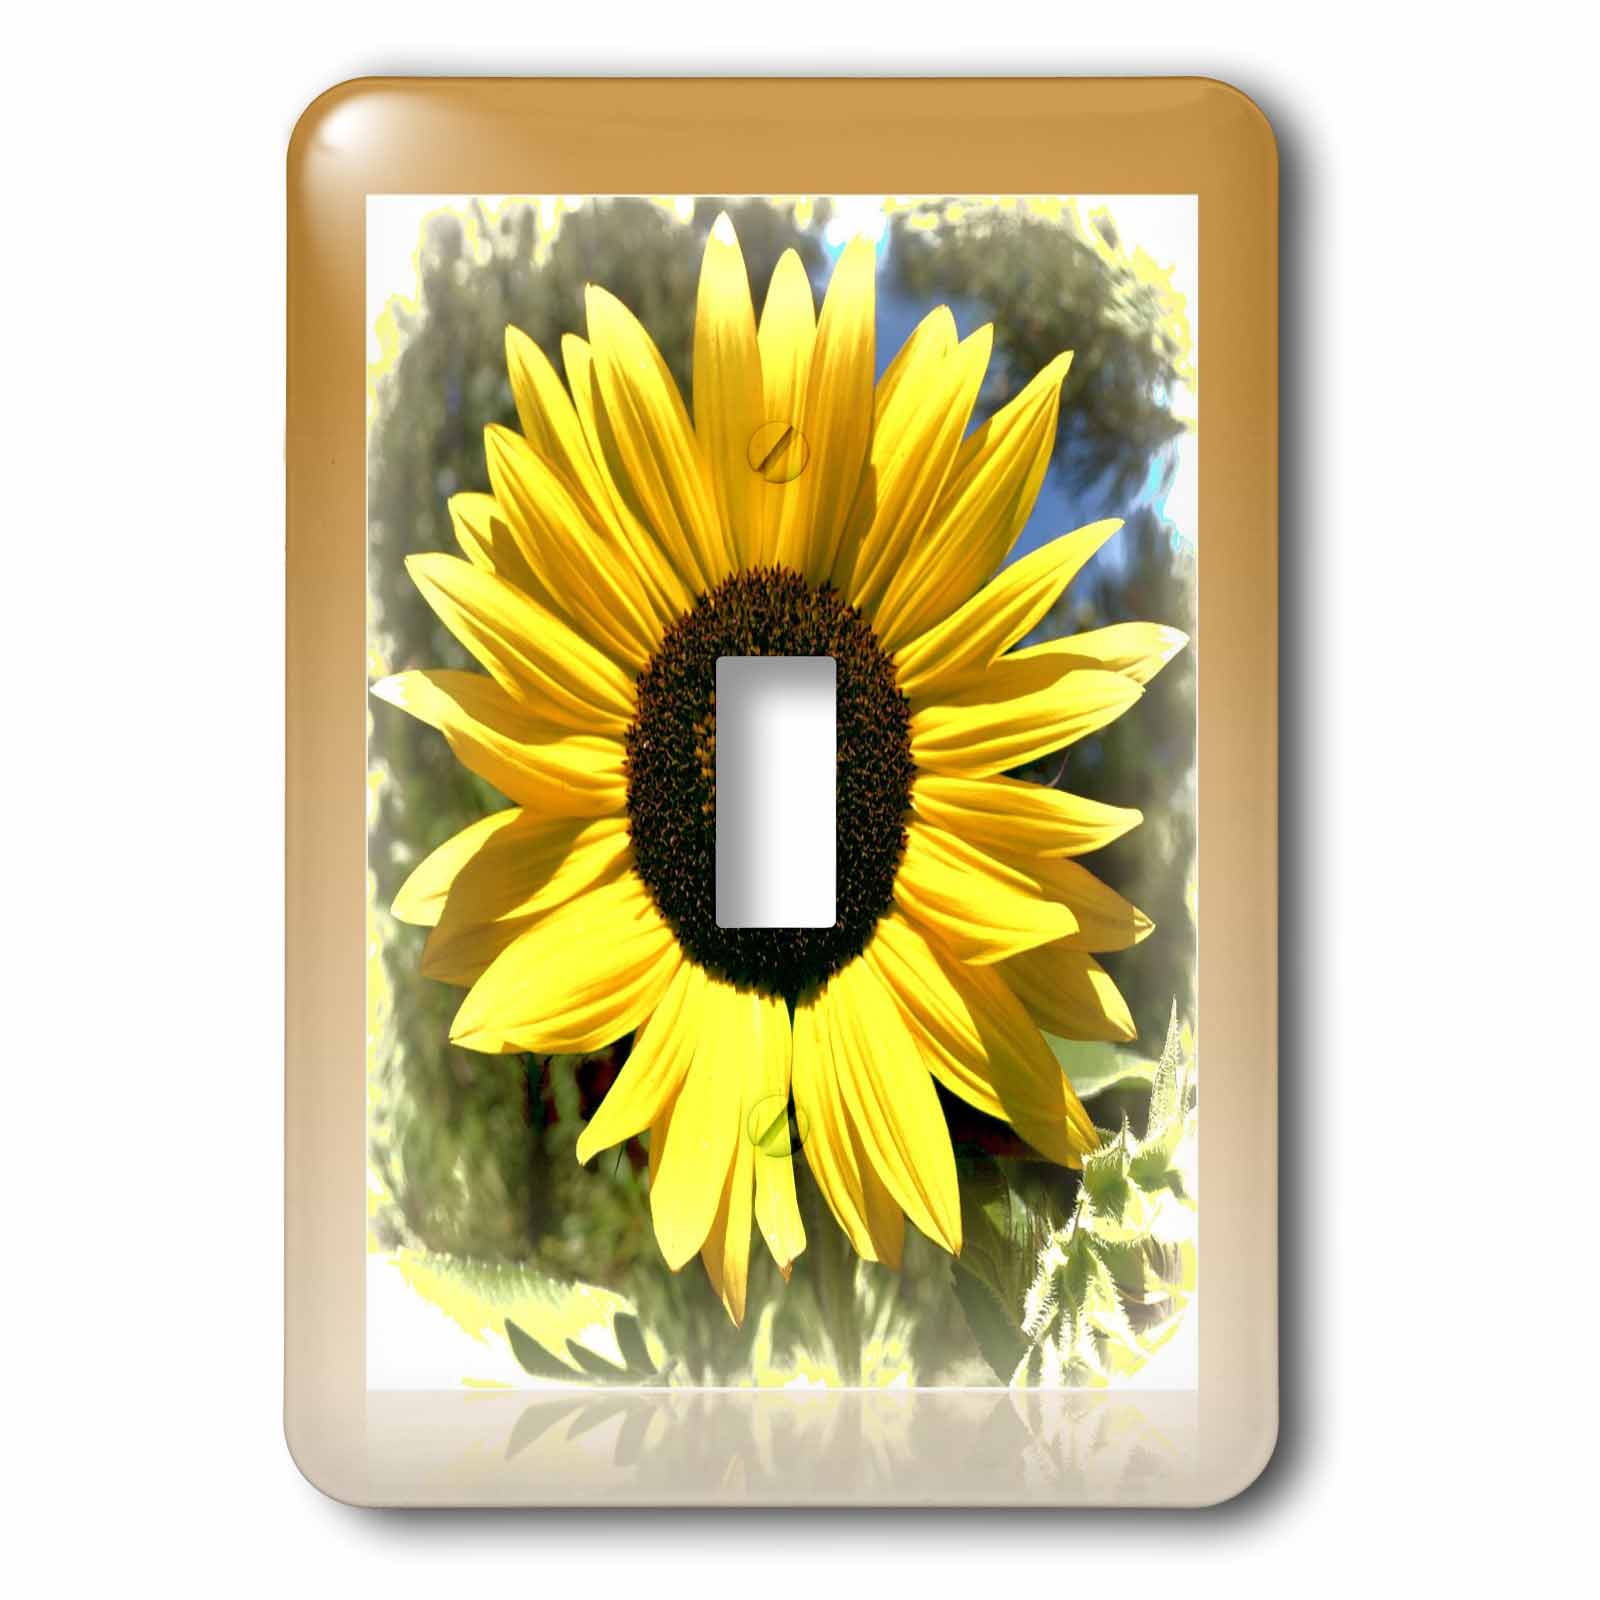 3dRose lsp_44694_1 Yellow Sunflower In Summer Toggle switch